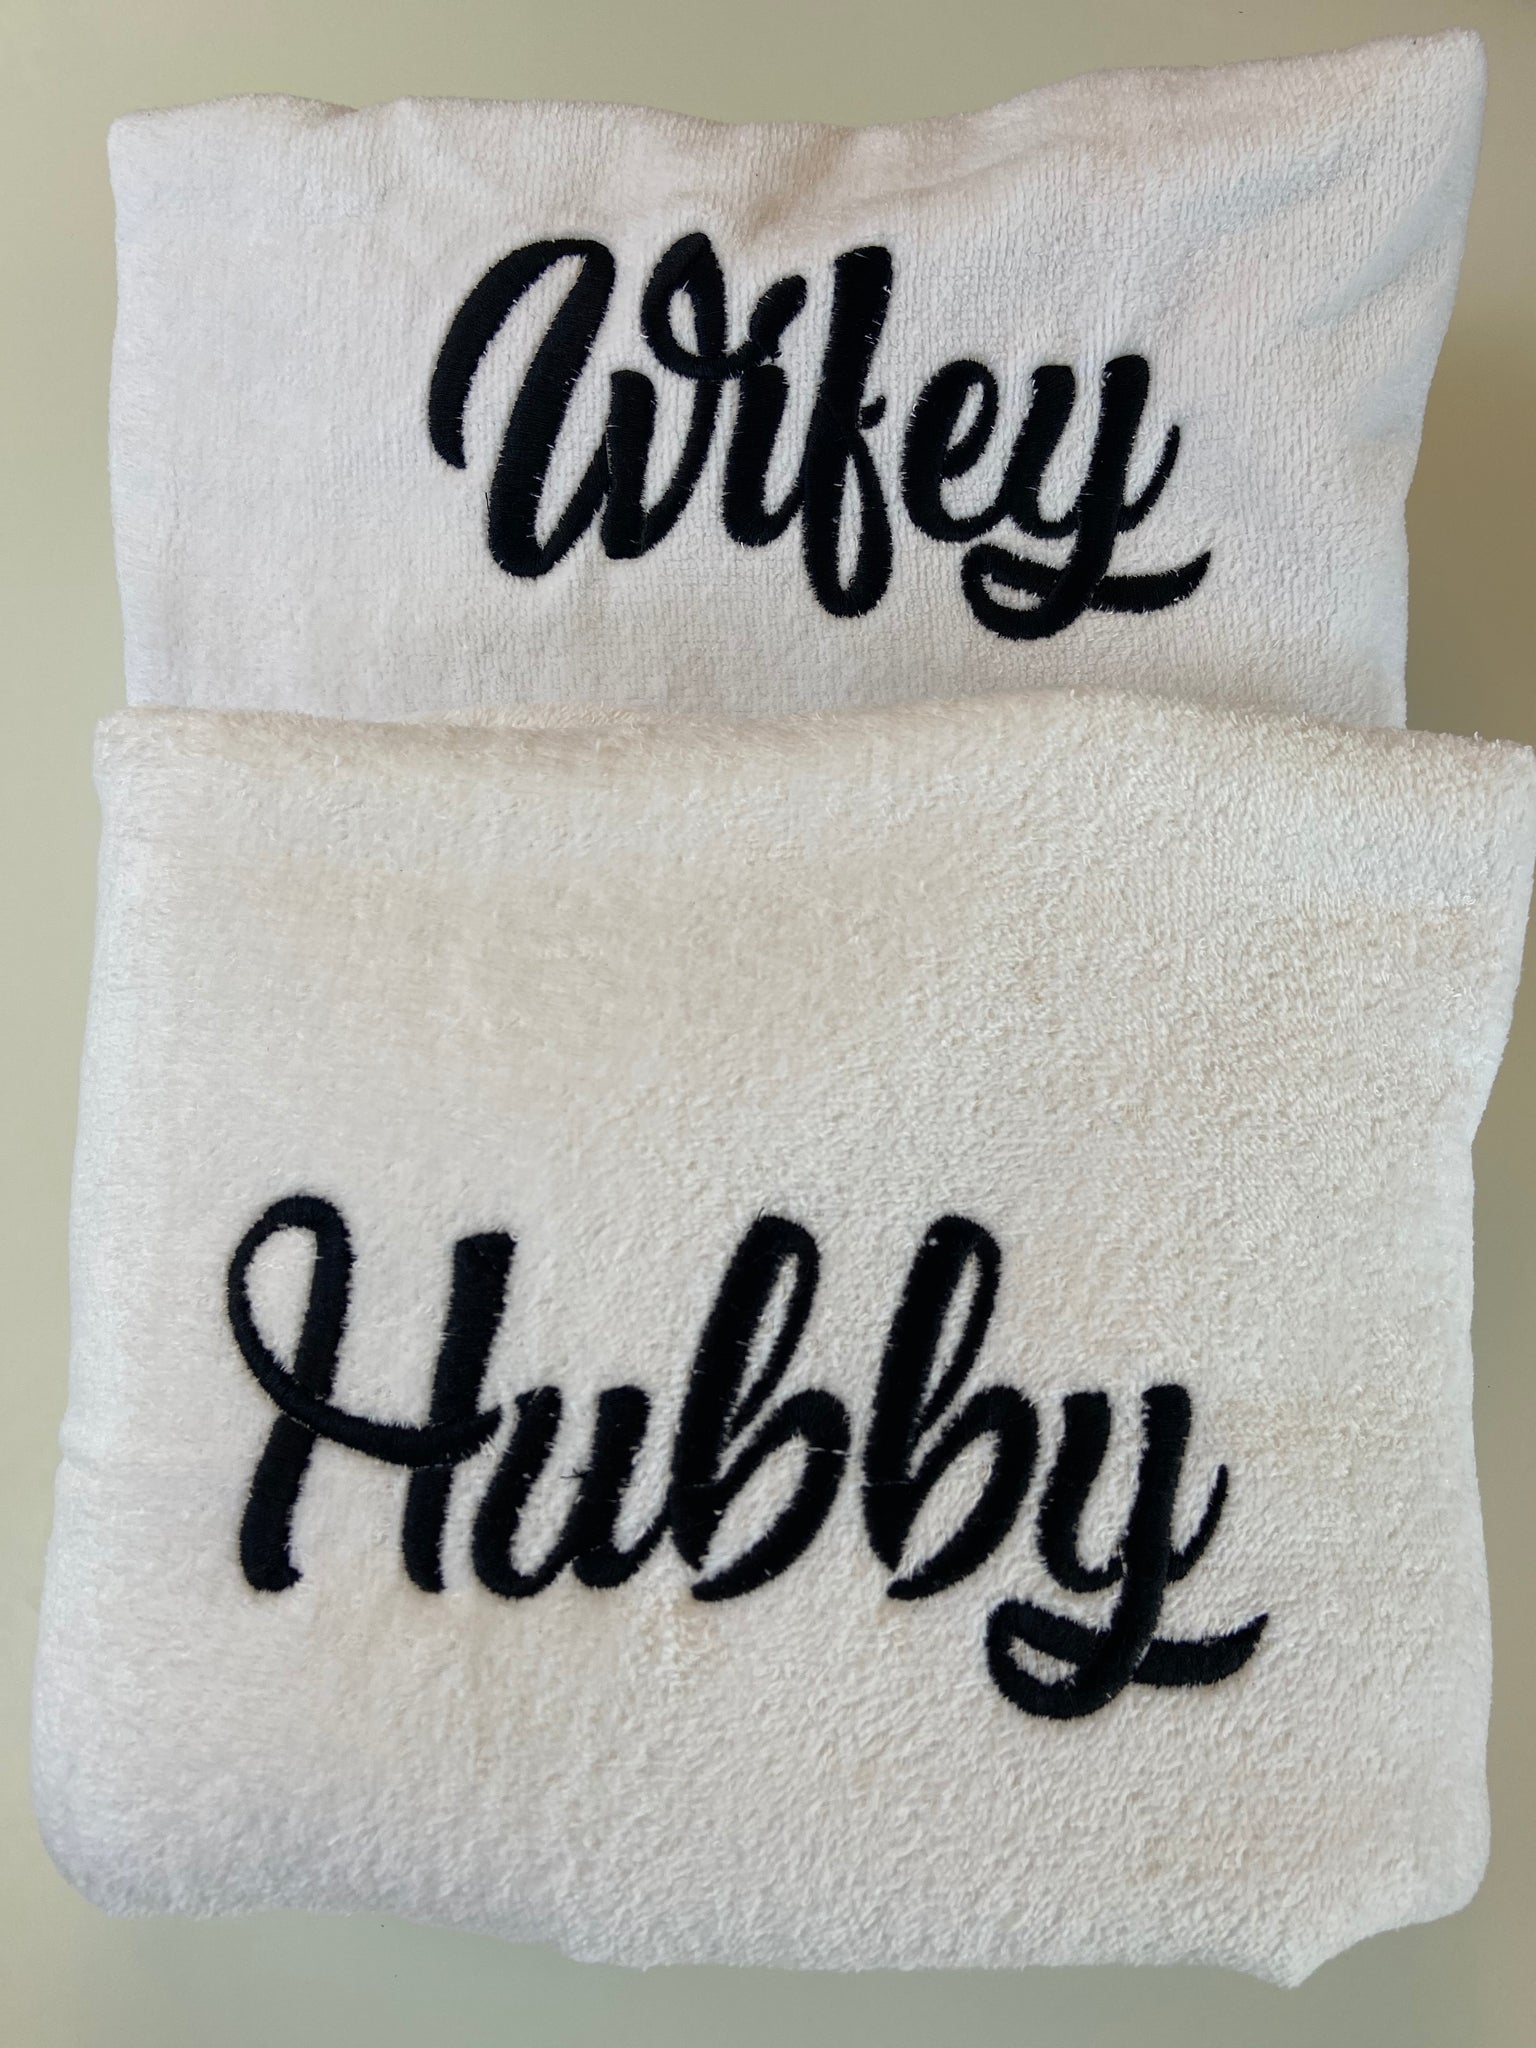 Towel Velour Embroidered with YOUR Name , monogram or logo